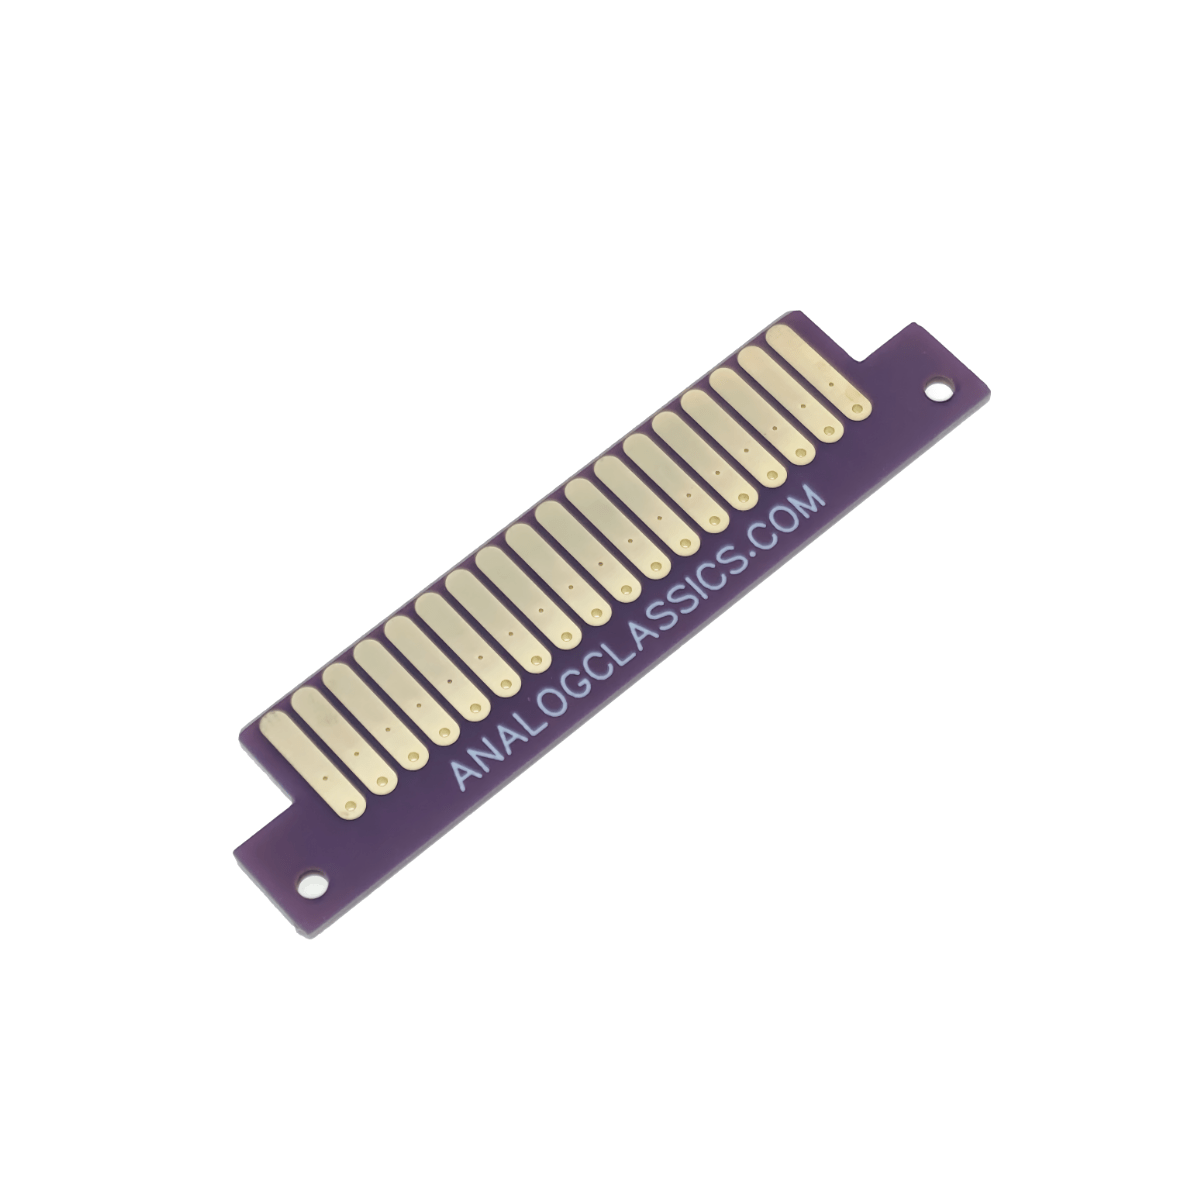 Neve 80 Series Male Card Edge Connector on a white background